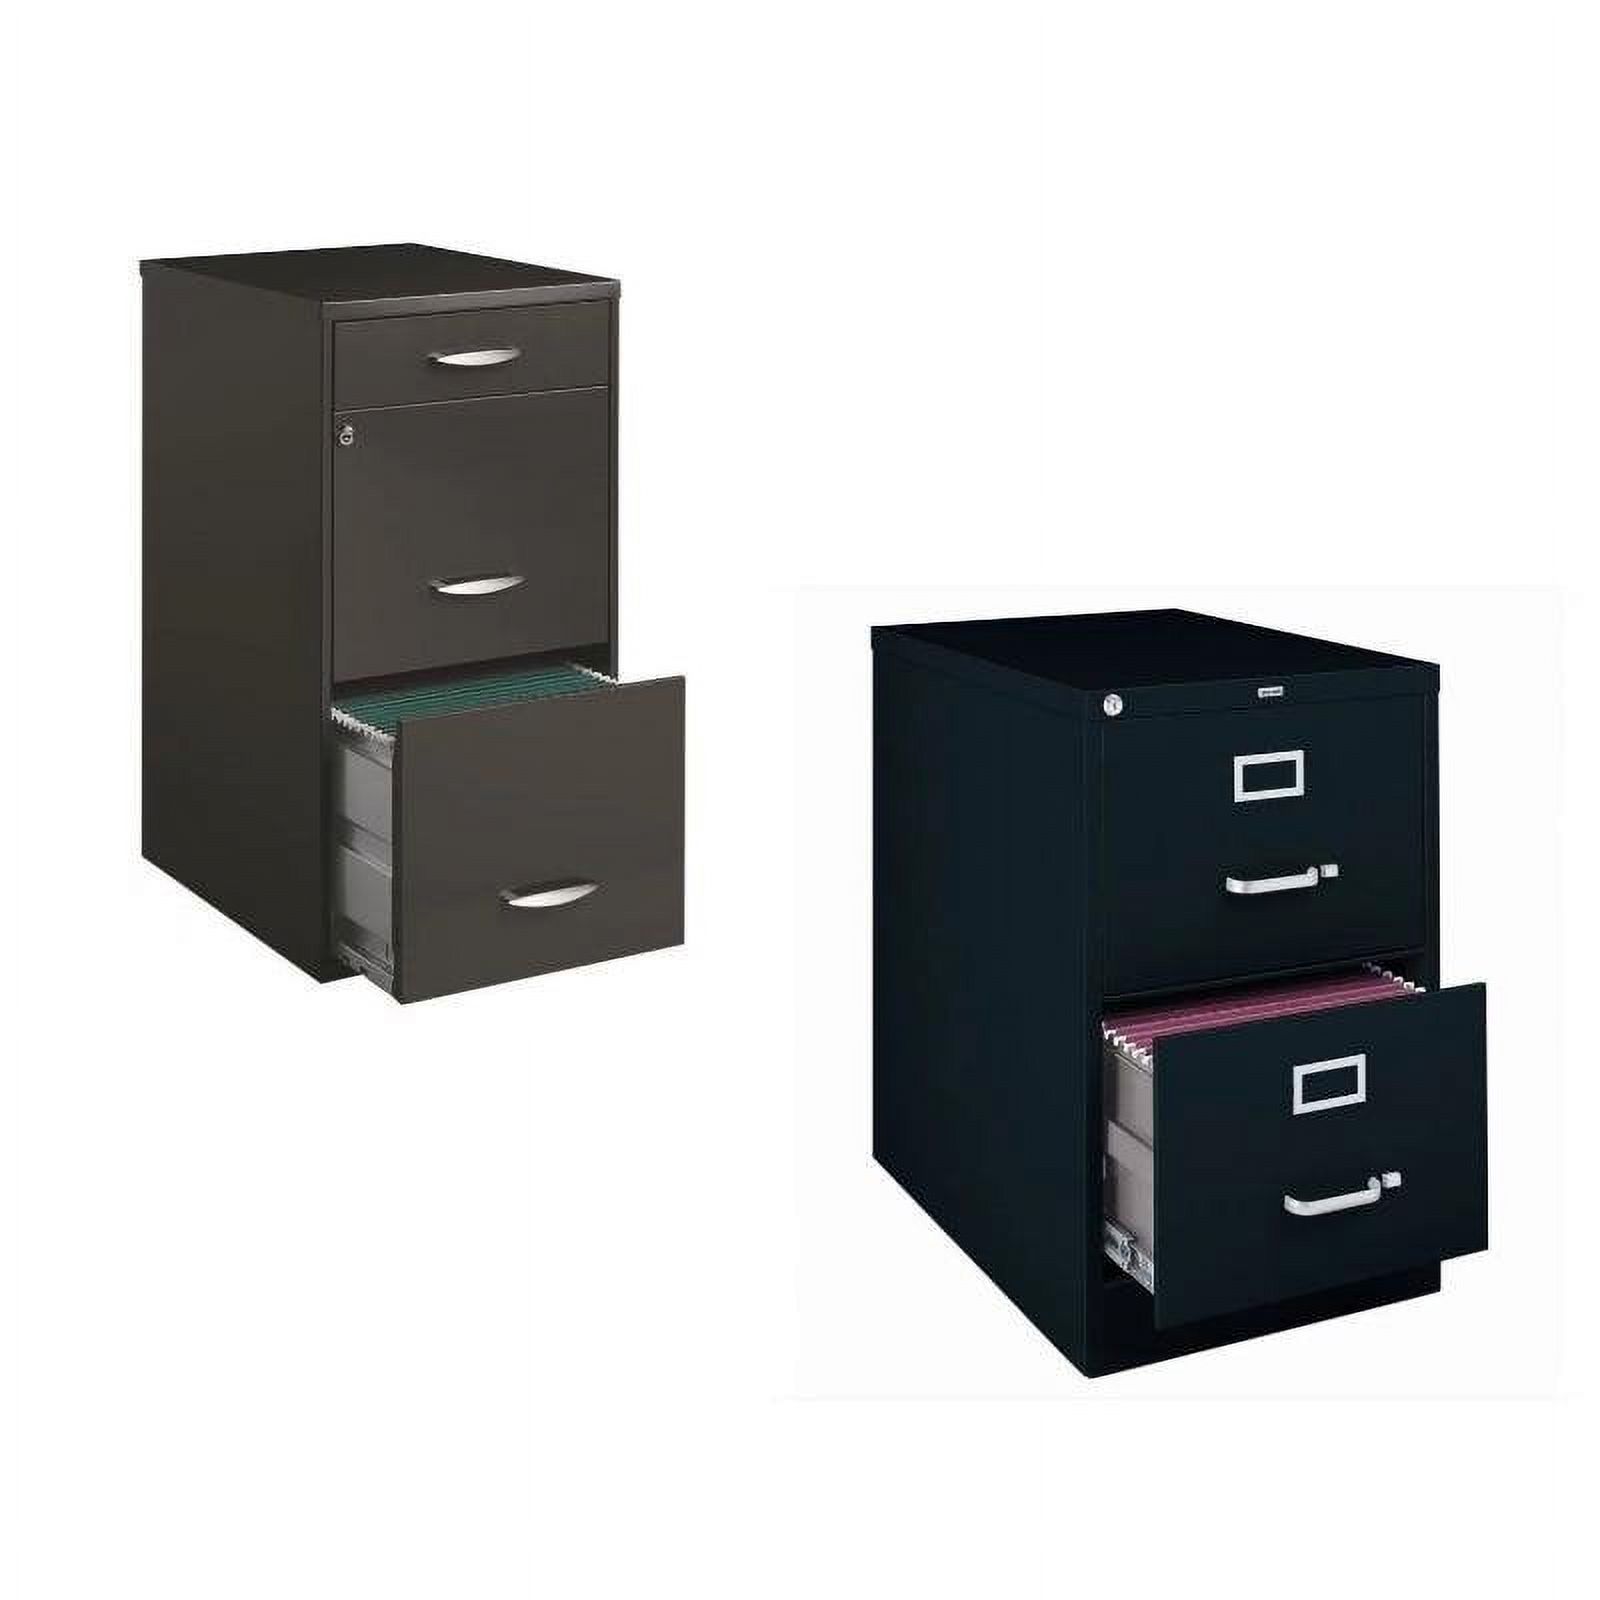 (Value Pack) 2 Drawer File Cabinet and 3 Drawer File Cabinet - image 1 of 4